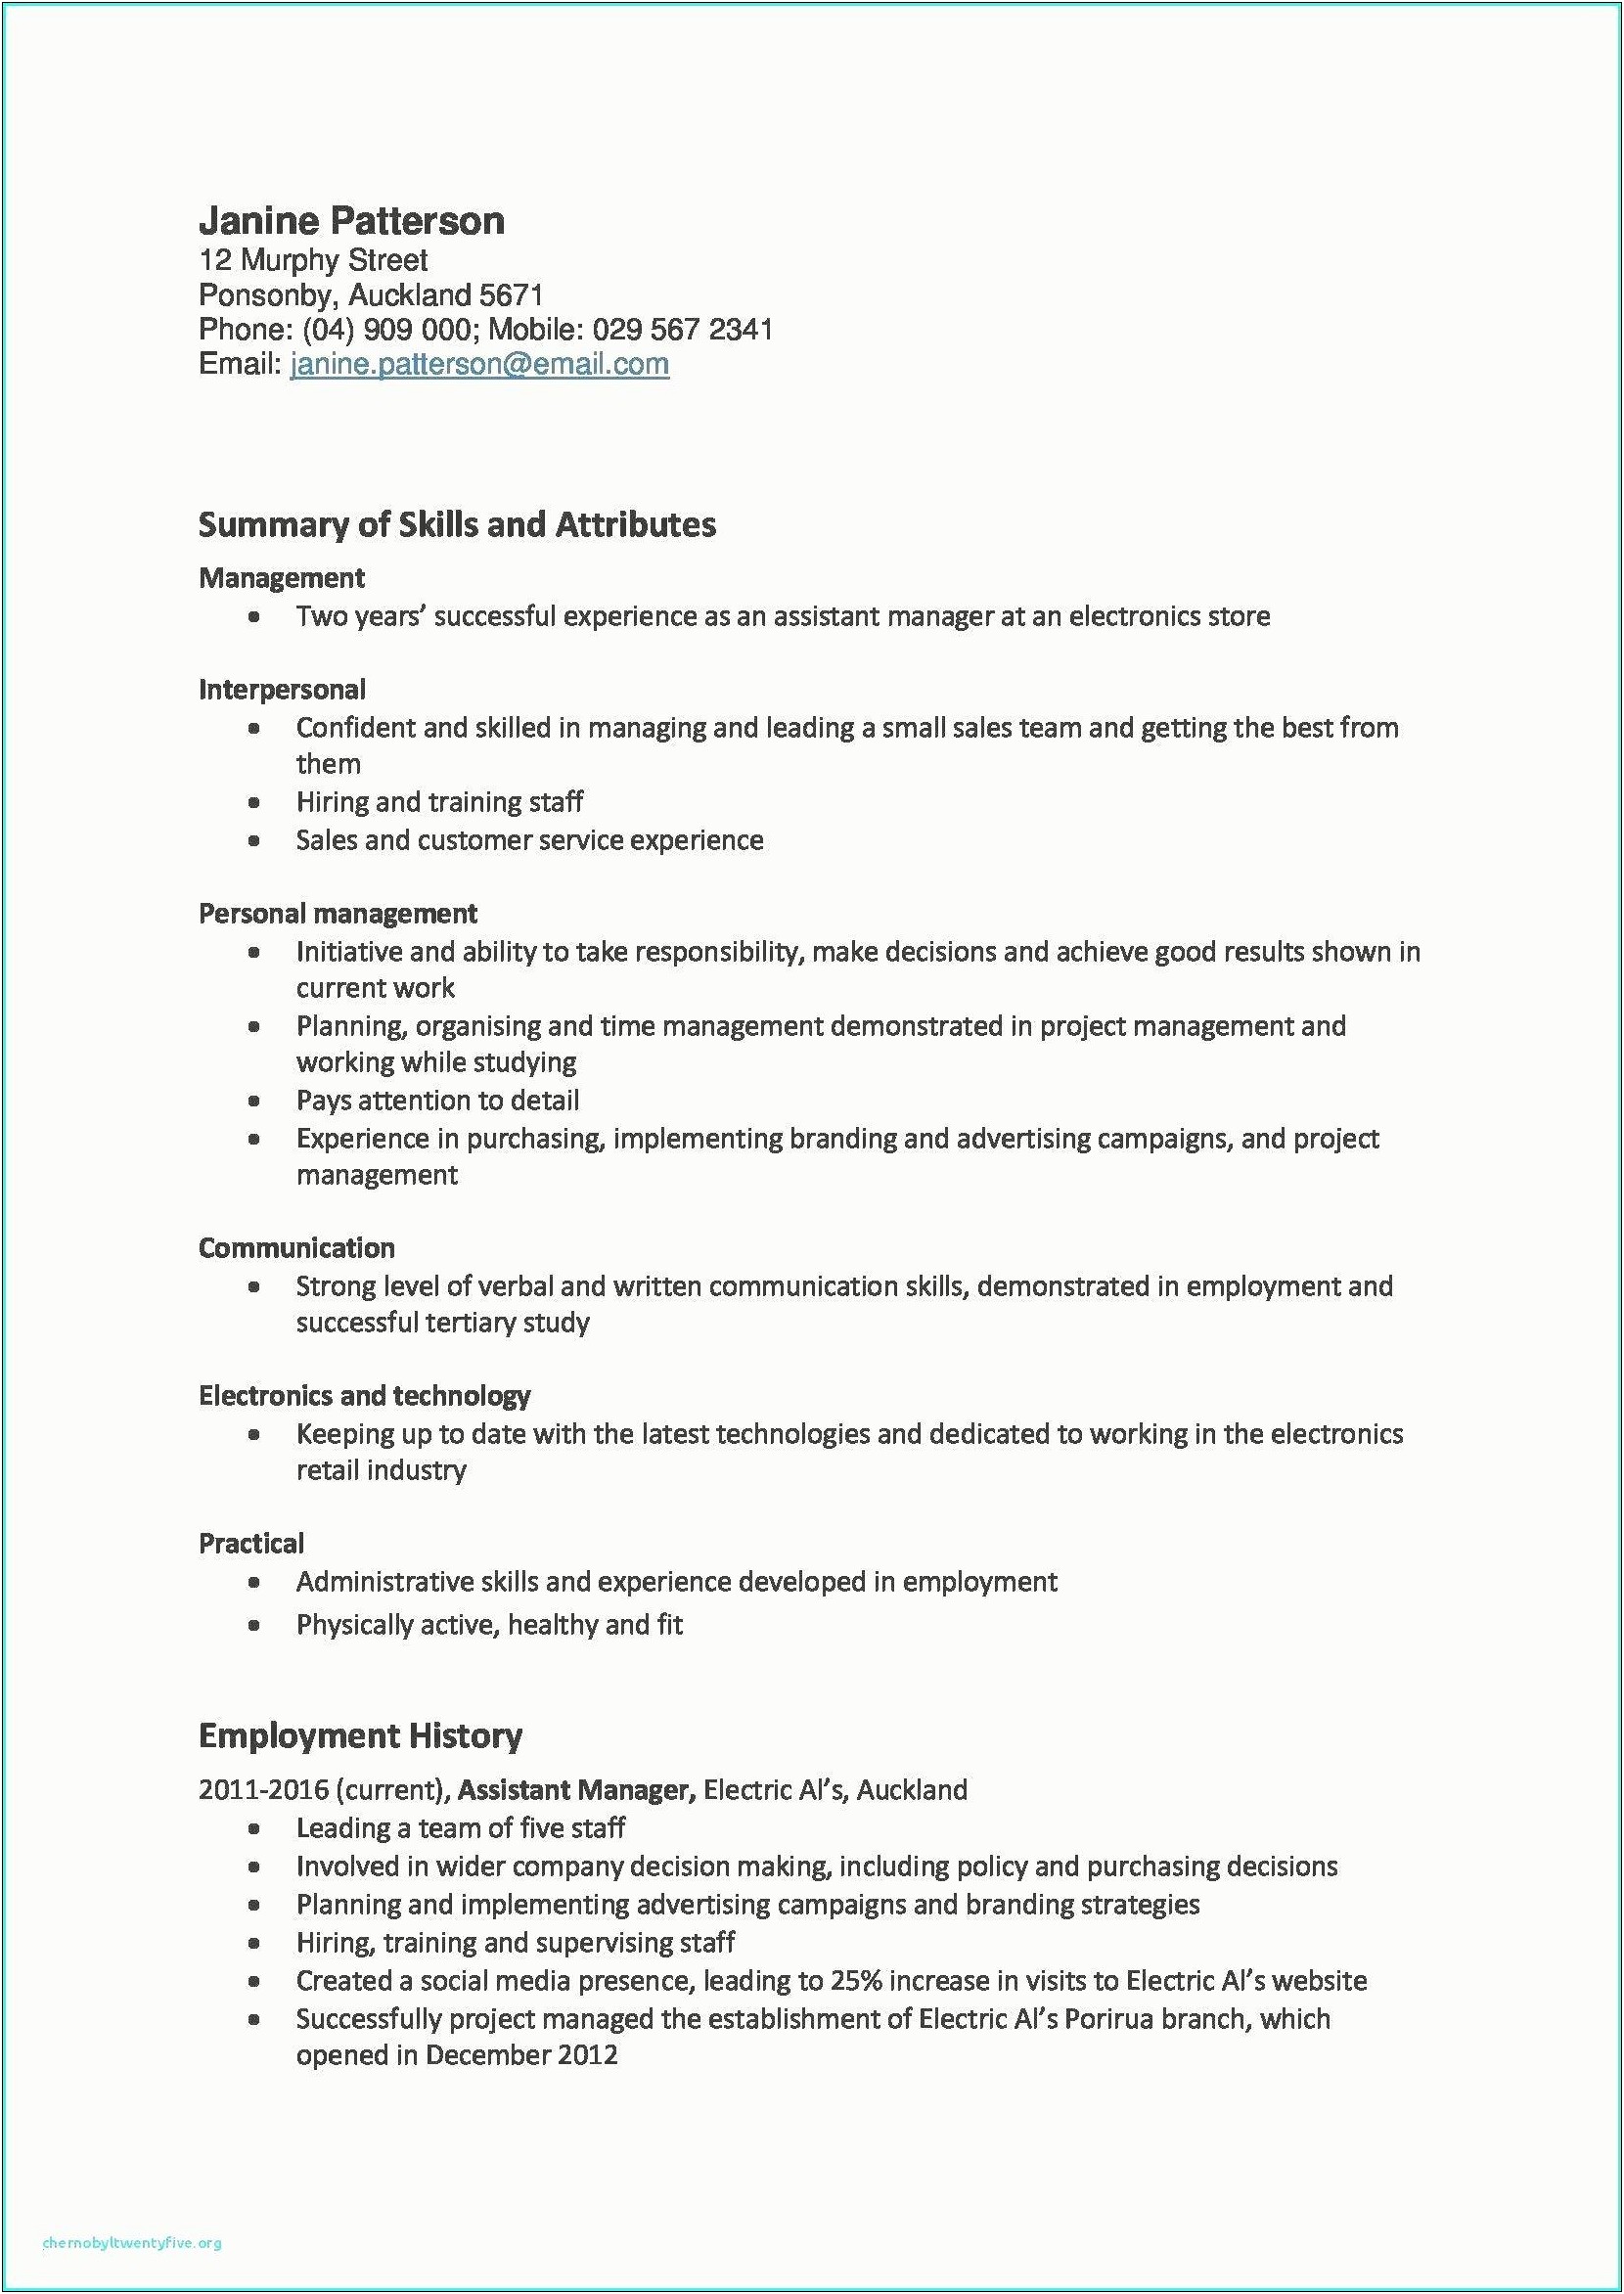 Resume Summary Project Manager Digital